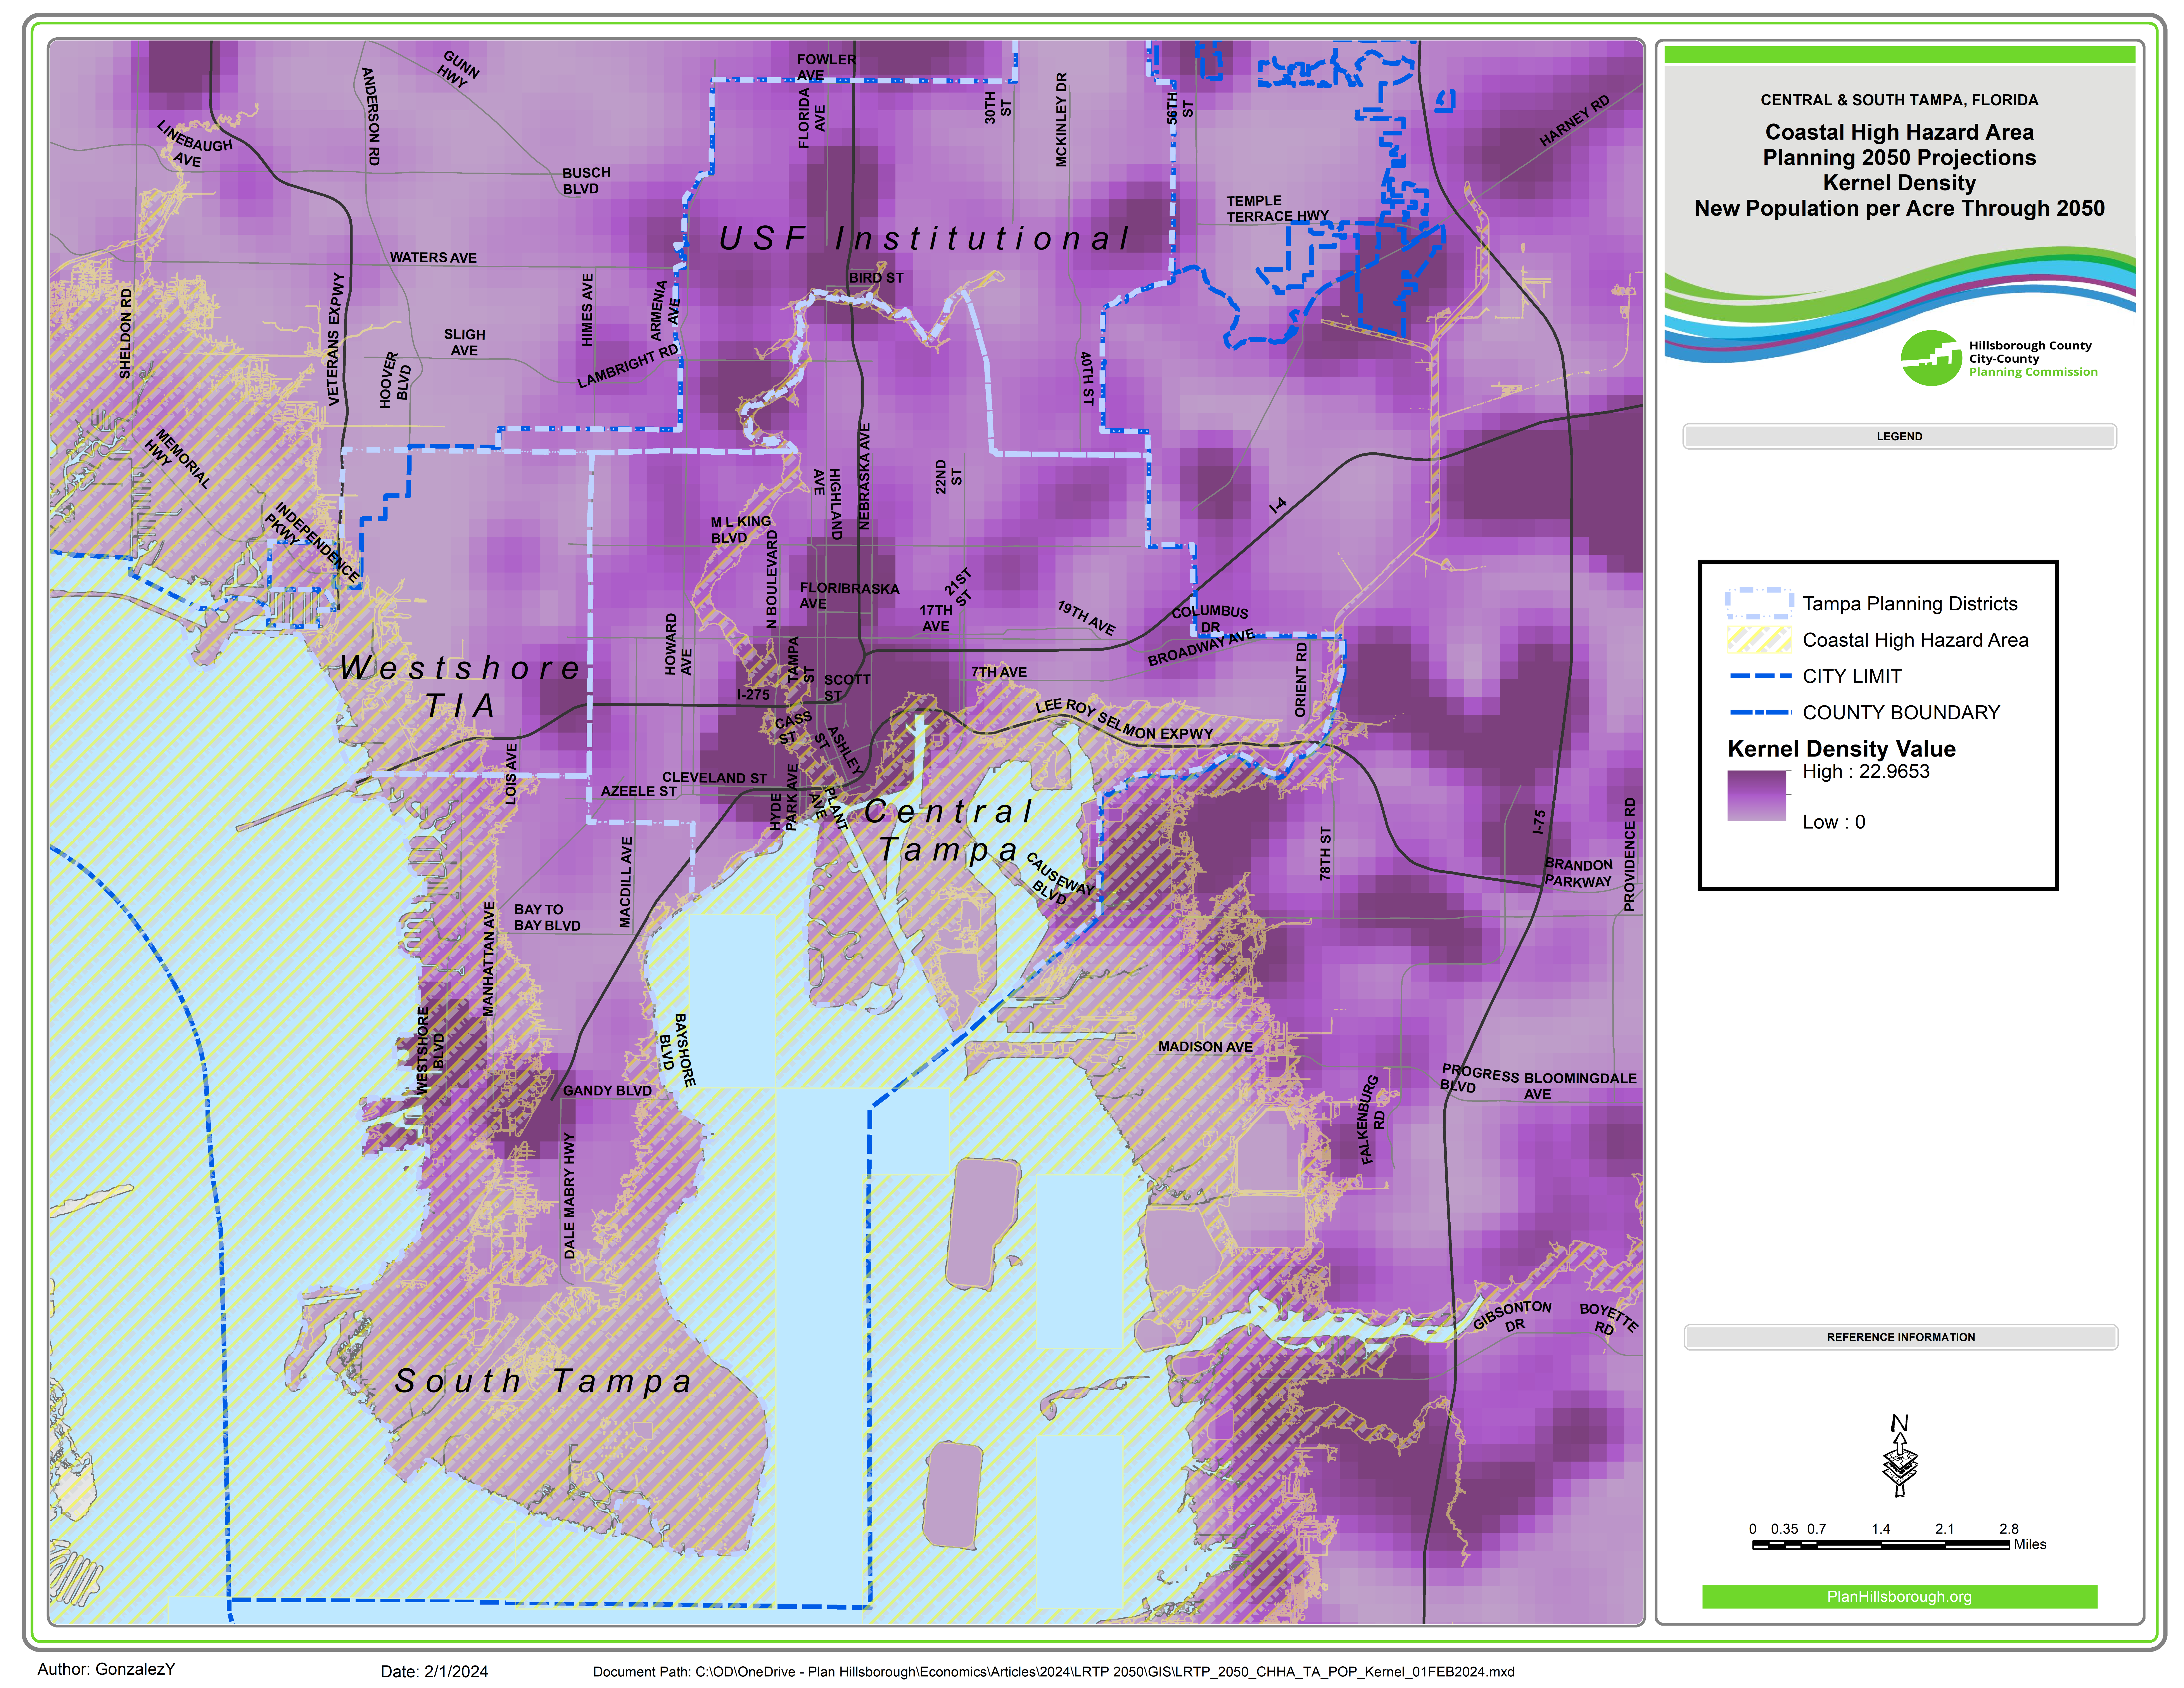 This map shows new resident per acre through 2050 for the Central and South Tampa planning districts. The map shows Tampa's planning districts and the coastal high hazard planning area (hatched). Darker purple areas denote a higher number of new residents per acre through 2050.